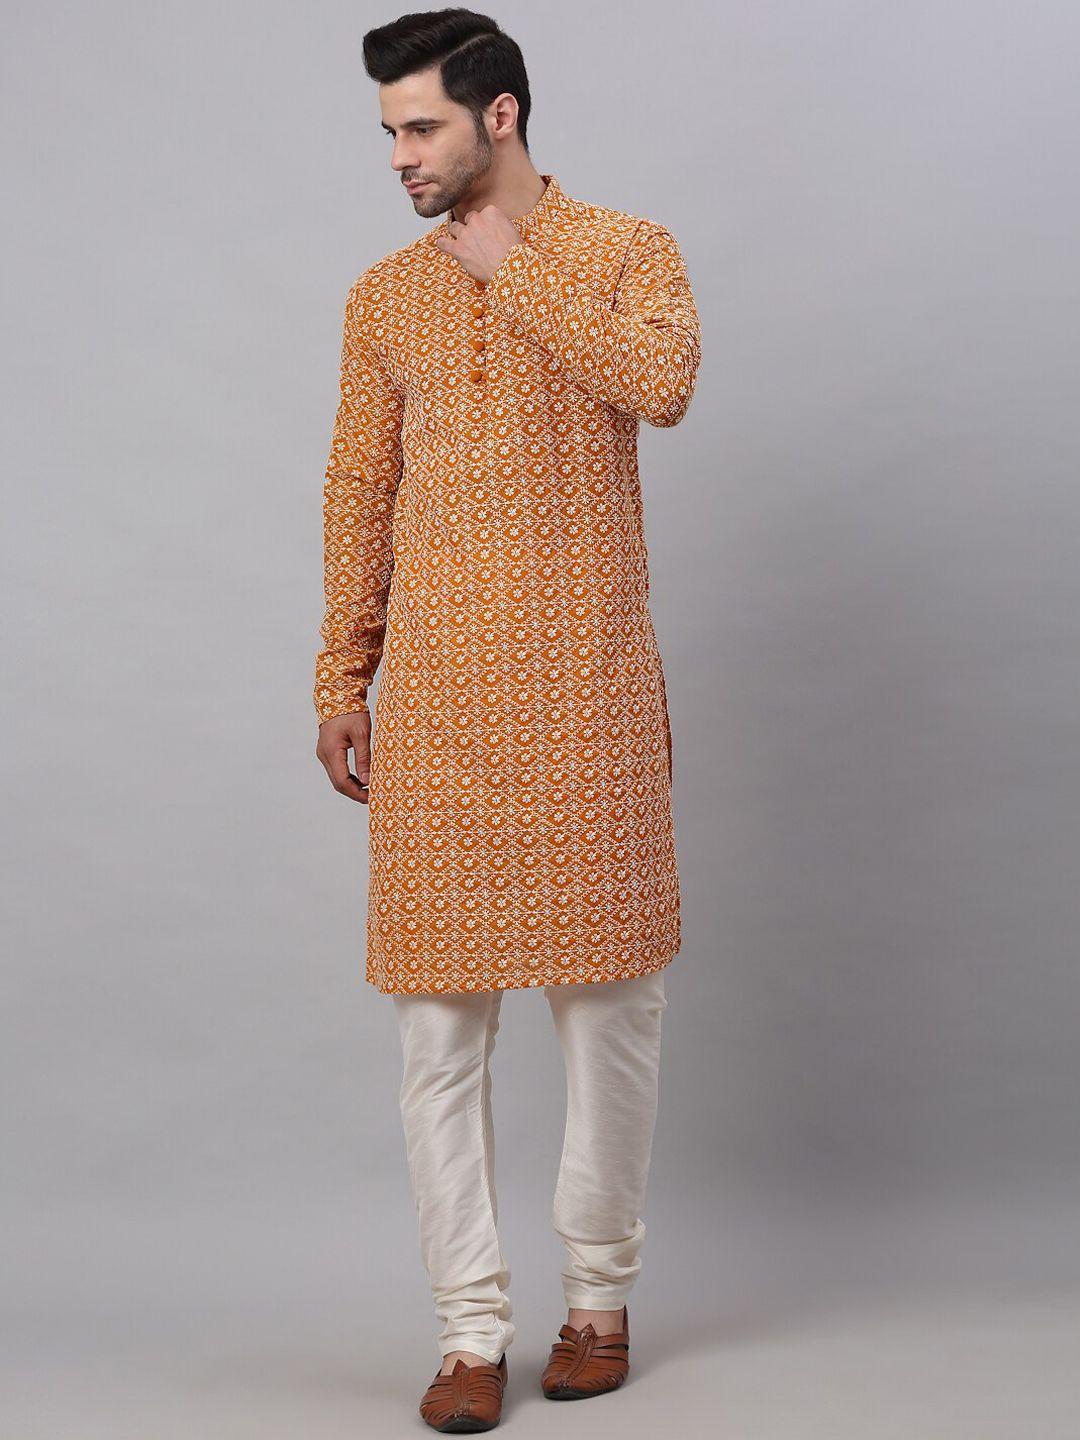 jompers men mustard yellow floral embroidered pure cotton kurta with churidar